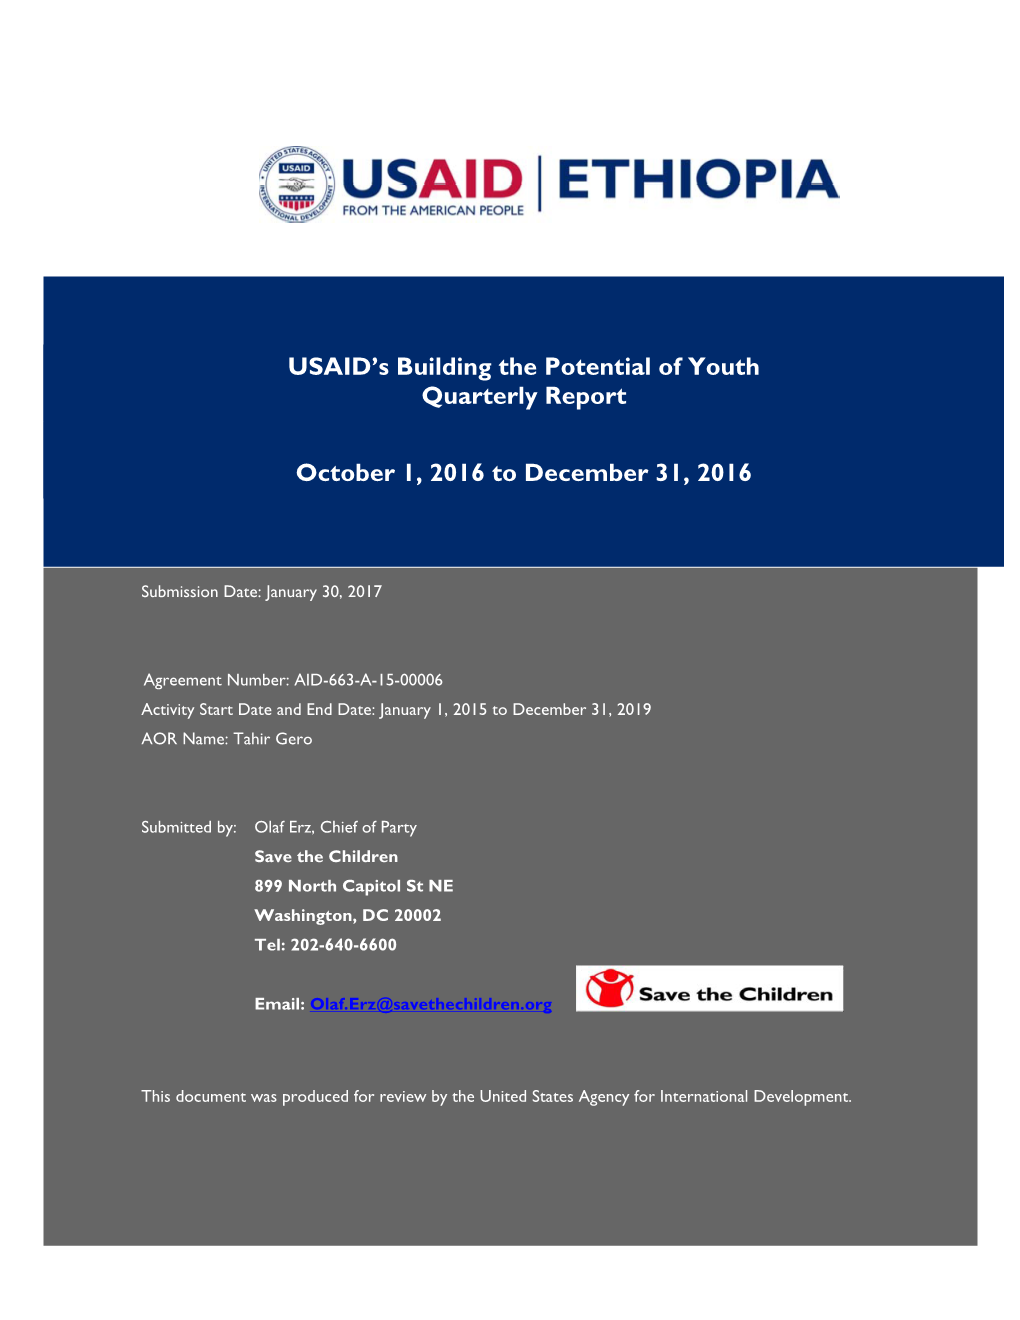 USAID's Building the Potential of Youth Quarterly Report October 1